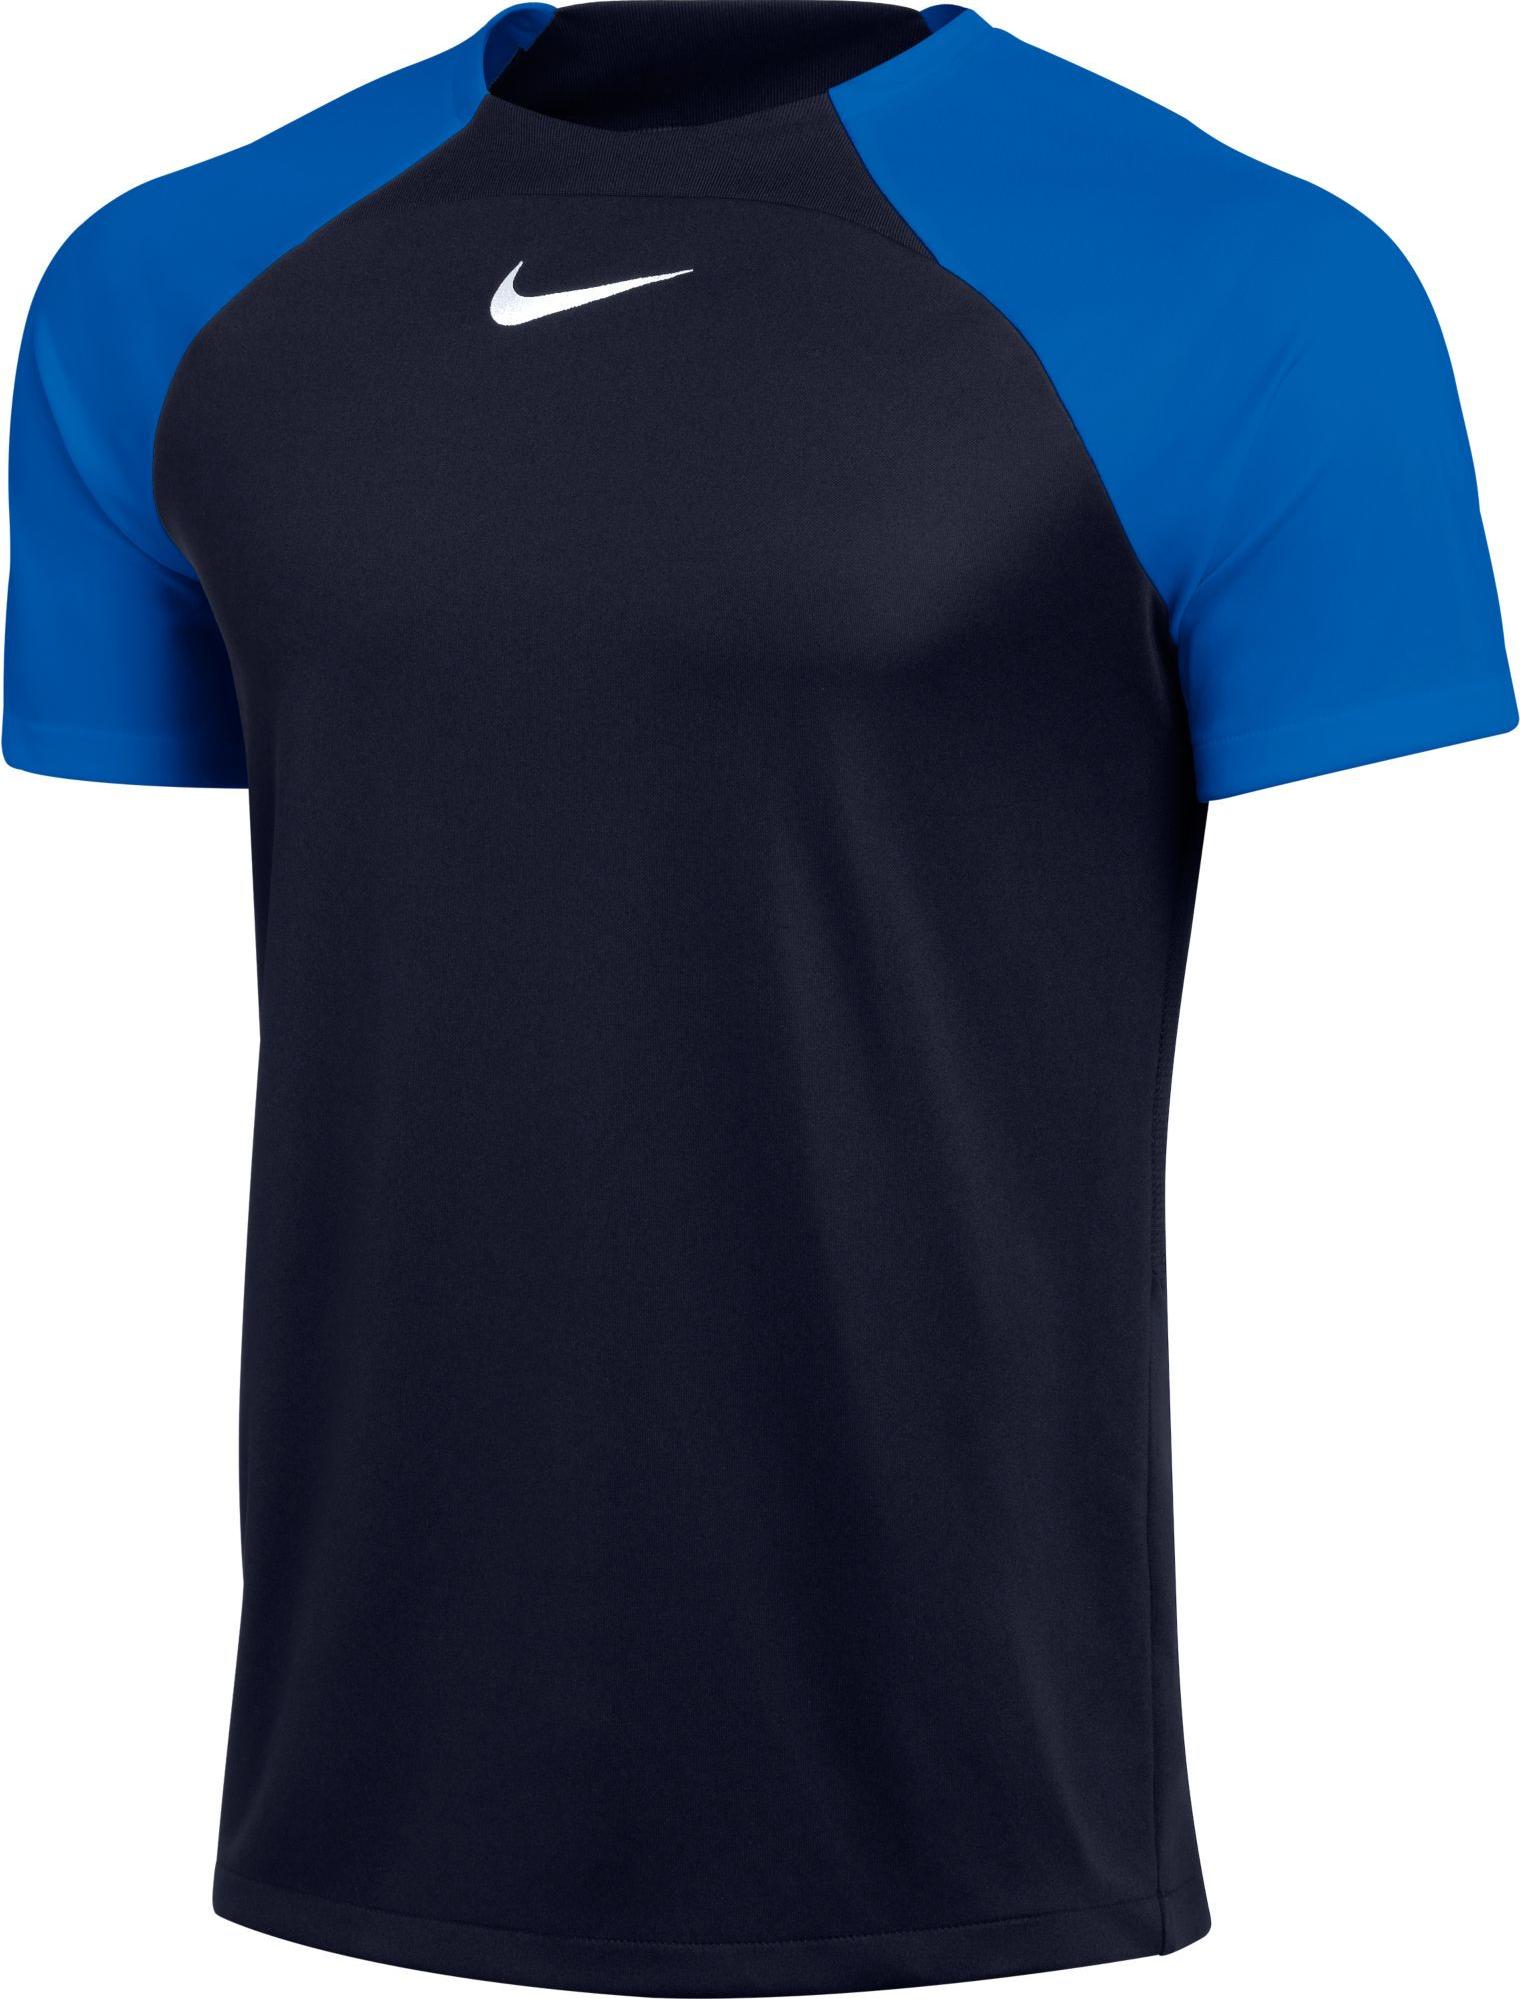 nike sneakers academy pro t shirt 412414 dh9225 451